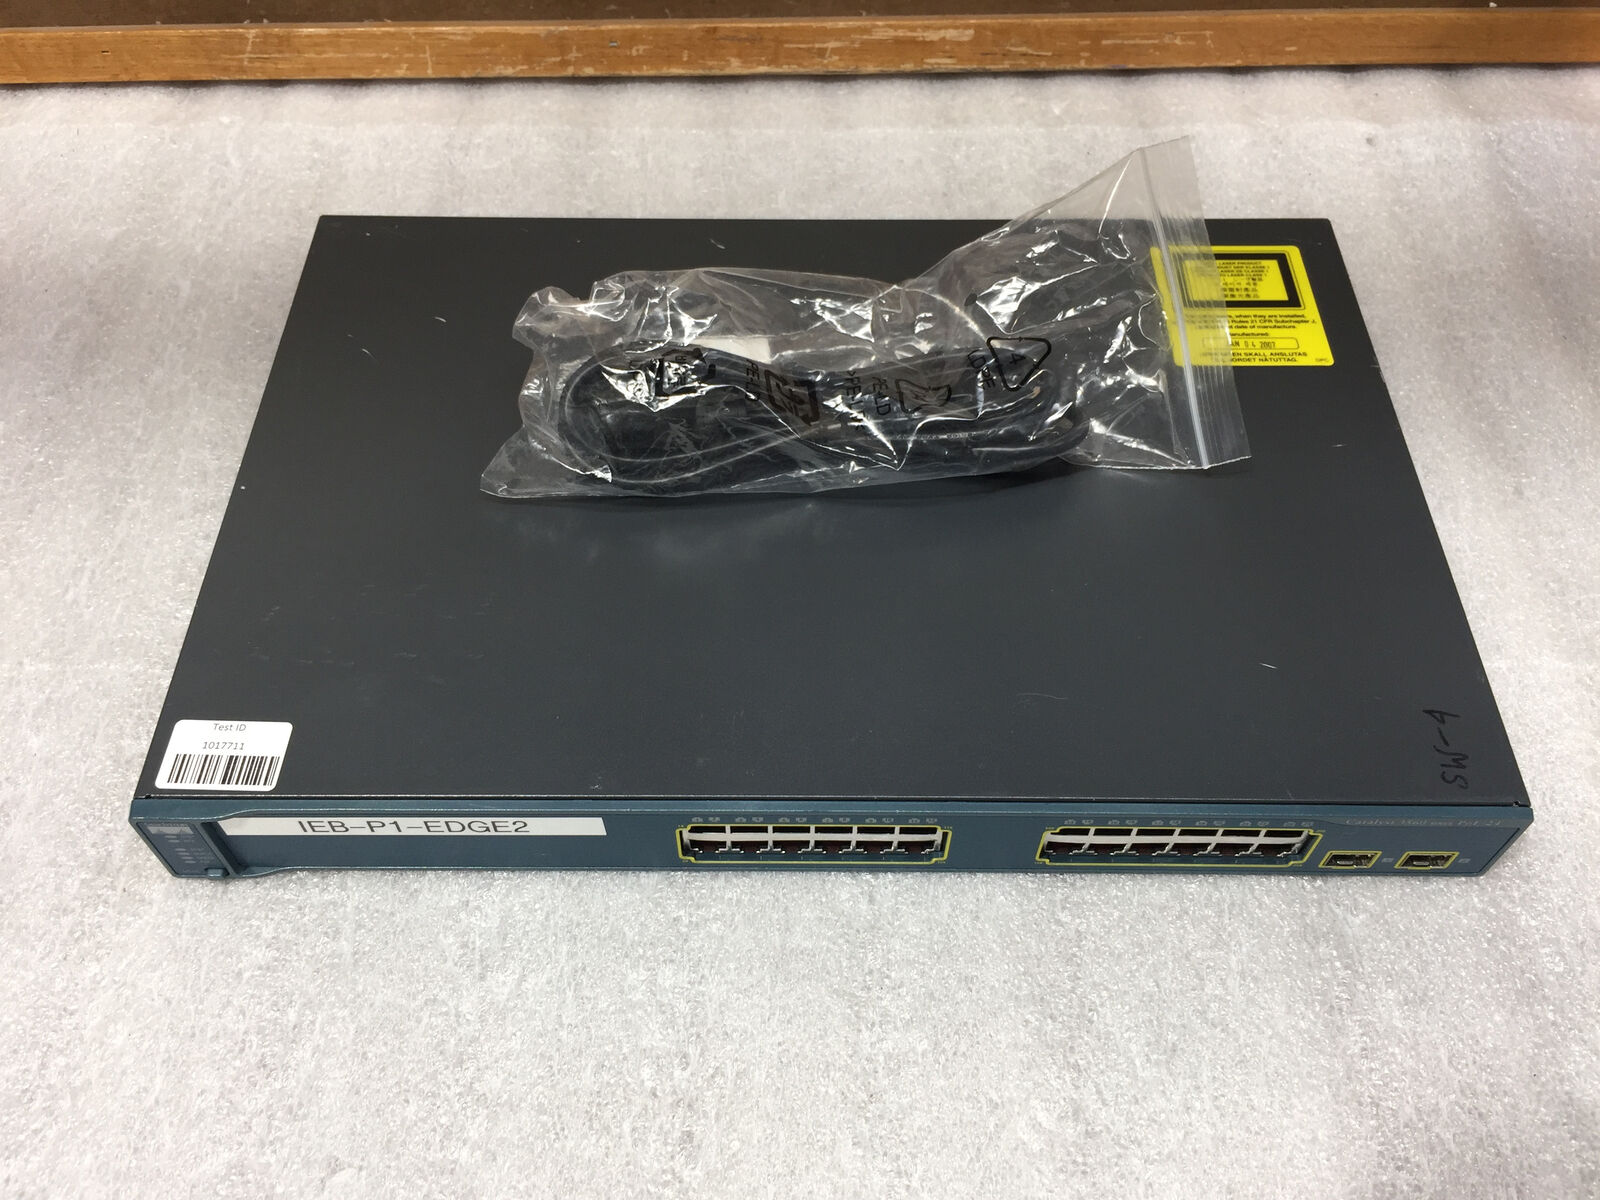 Cisco Catalyst 3560 Series WS-C3560-24PS-S V06 PoE-24-Port Switch, -TESTED